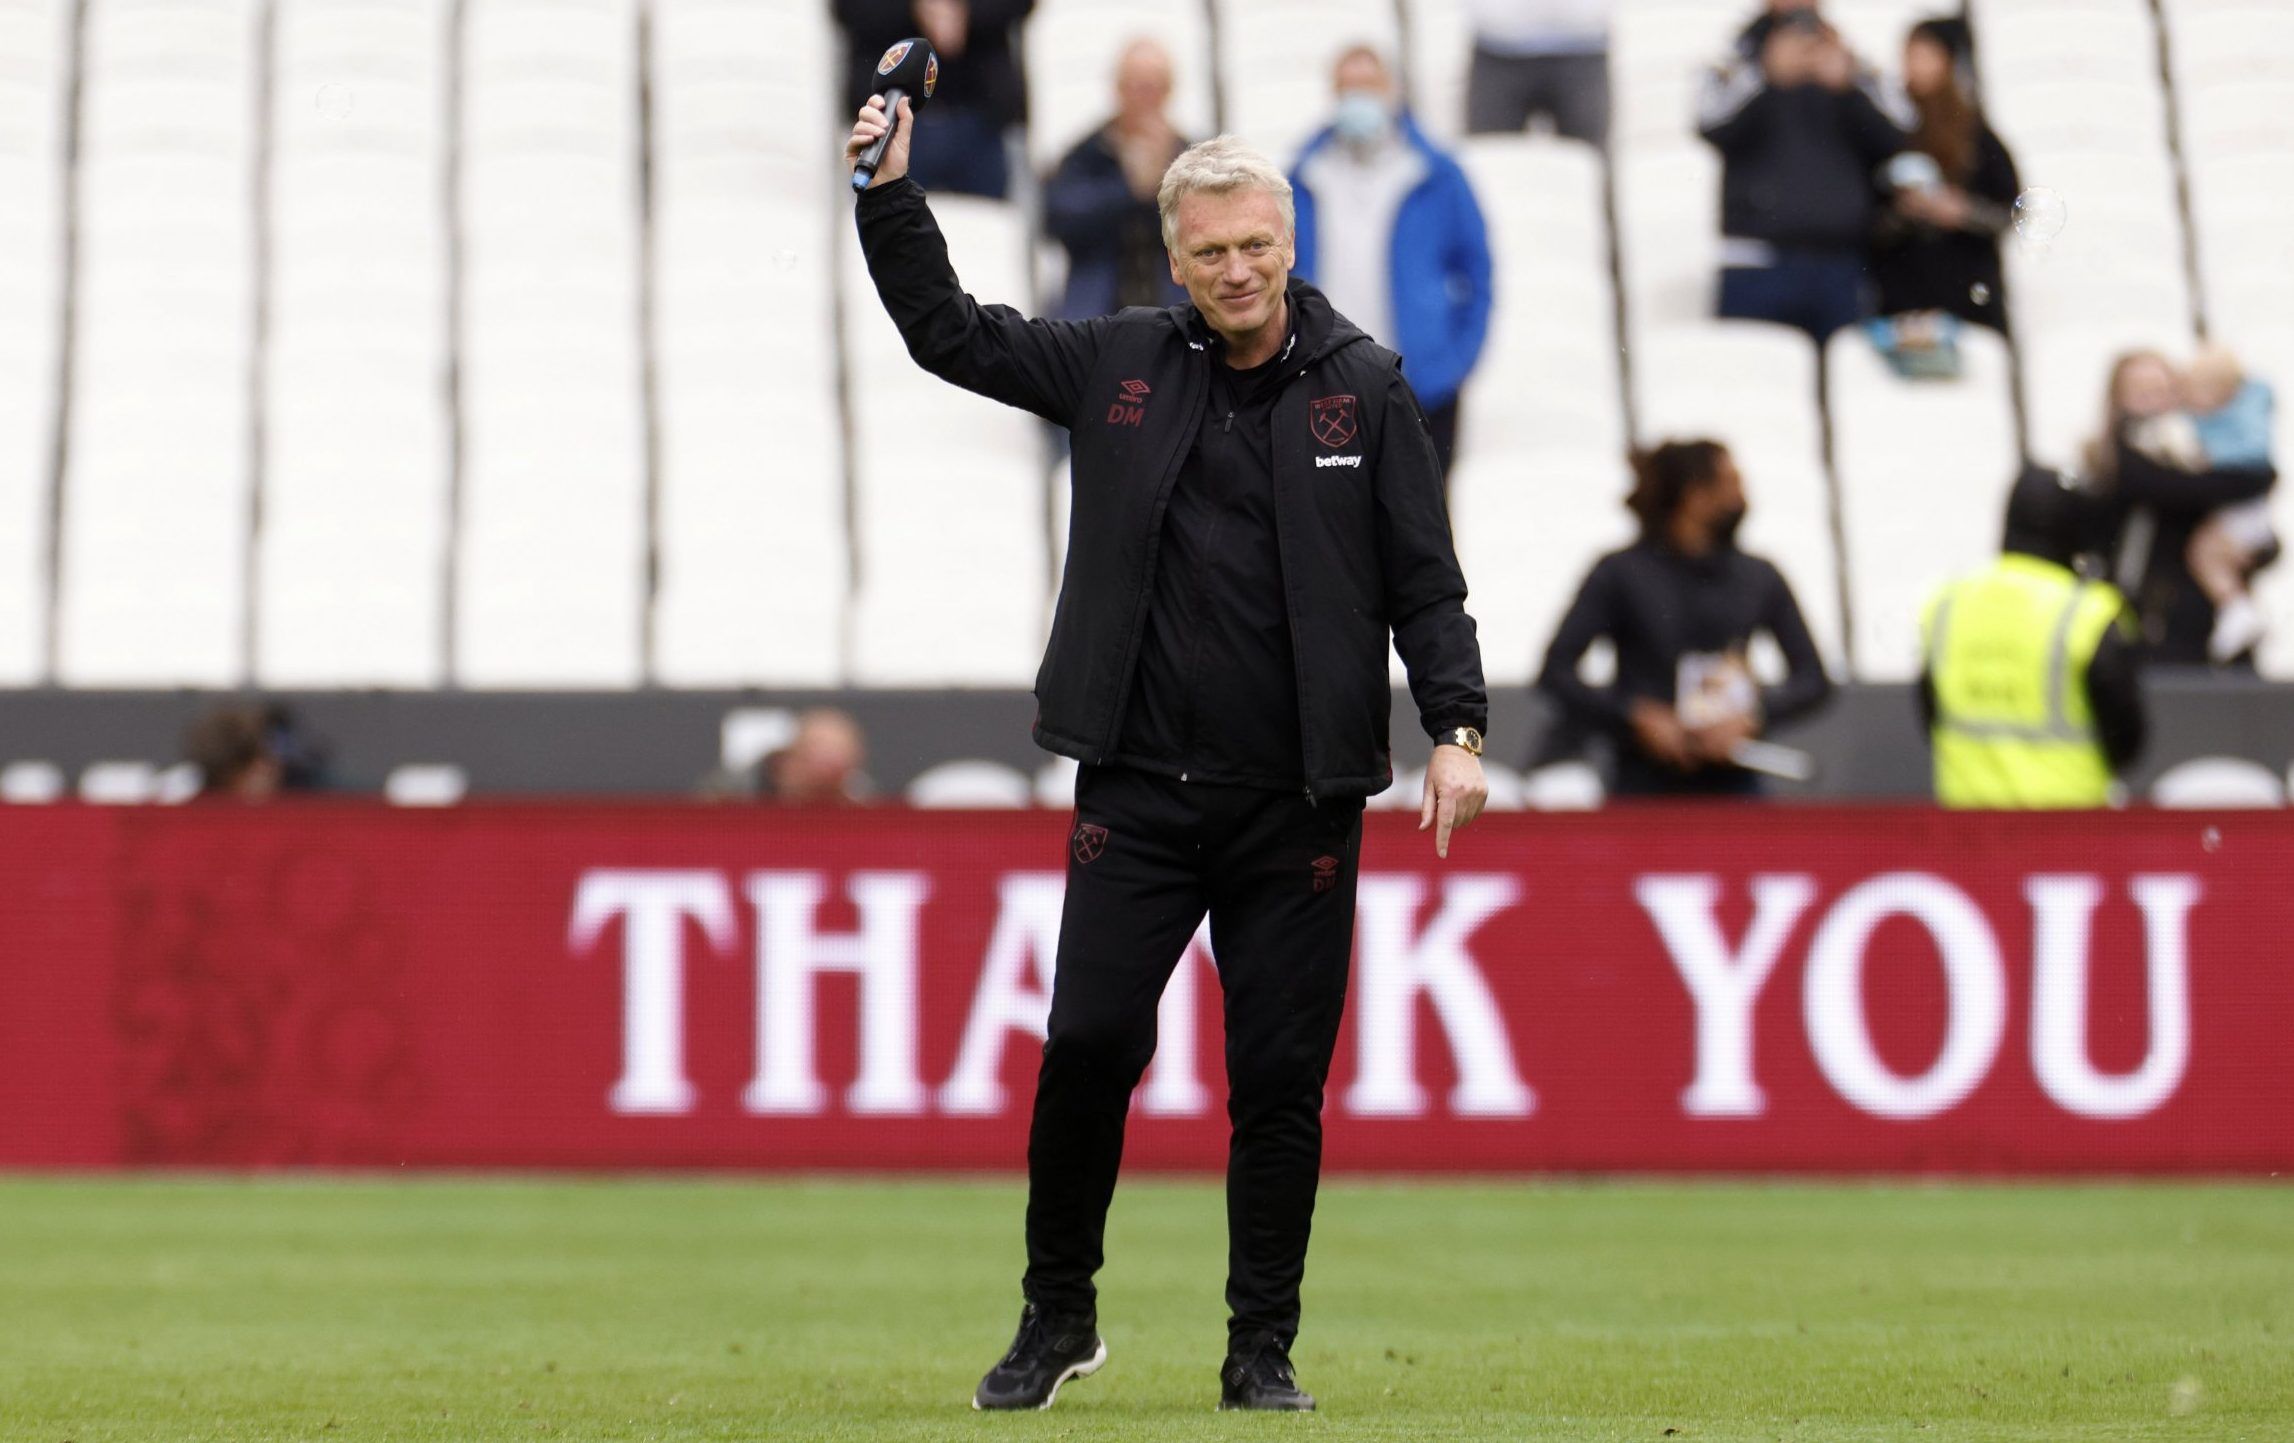 west ham manager david moyes addresses the fans after win over southampton on final premier league game